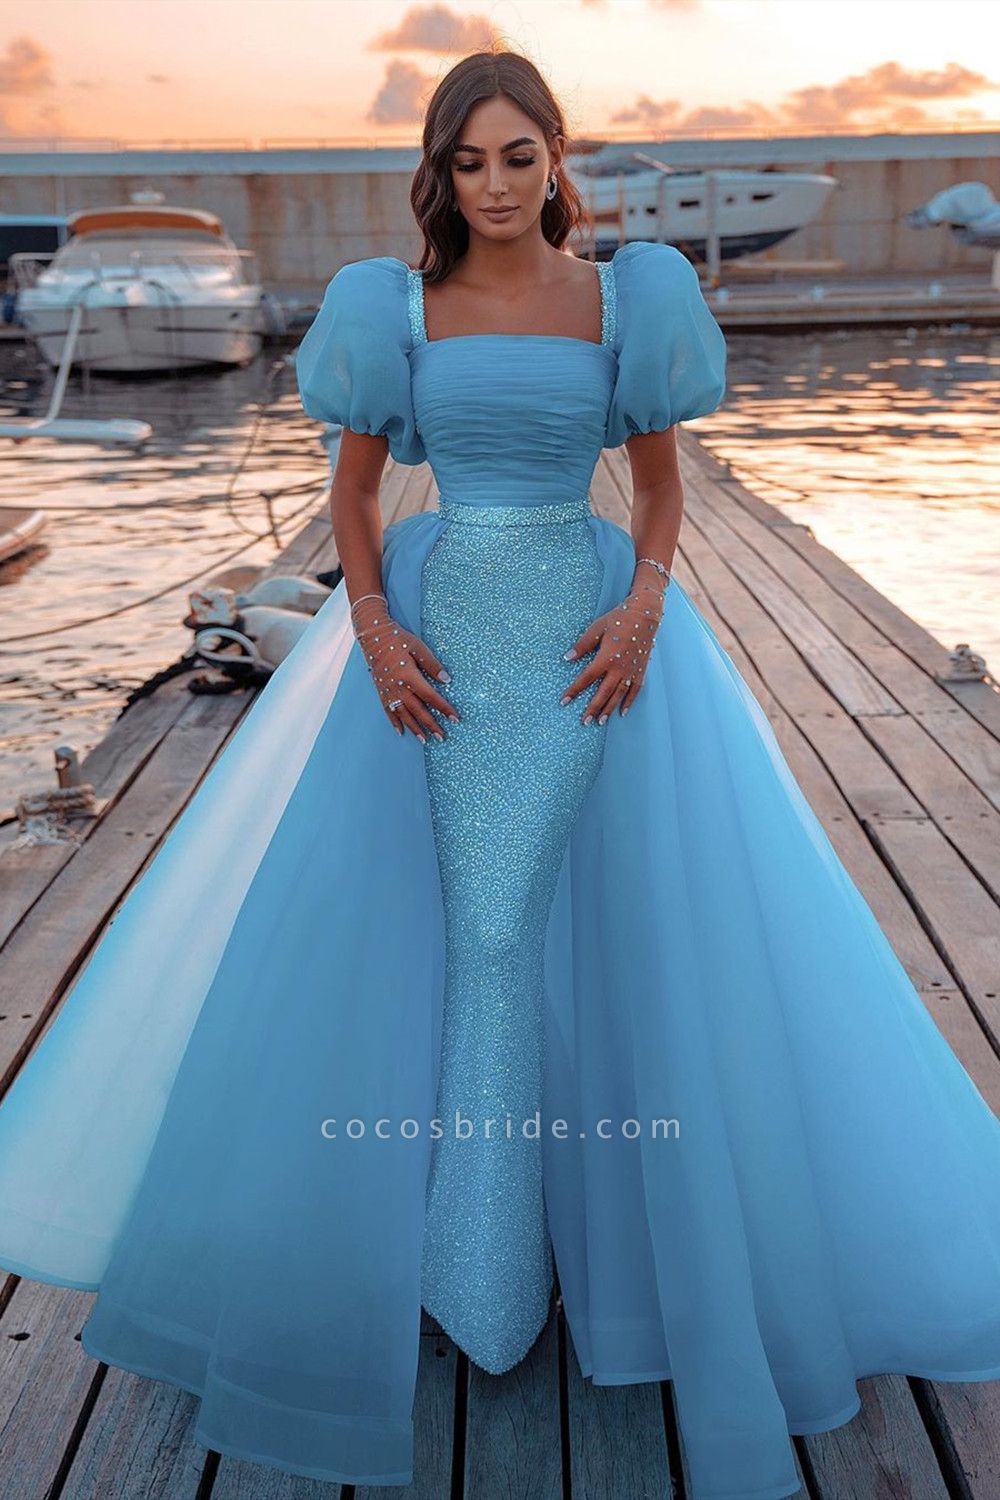 Gorgeous Puffy Sleeves Sequins Mermaid Prom Dress With Detachable Tulle Train